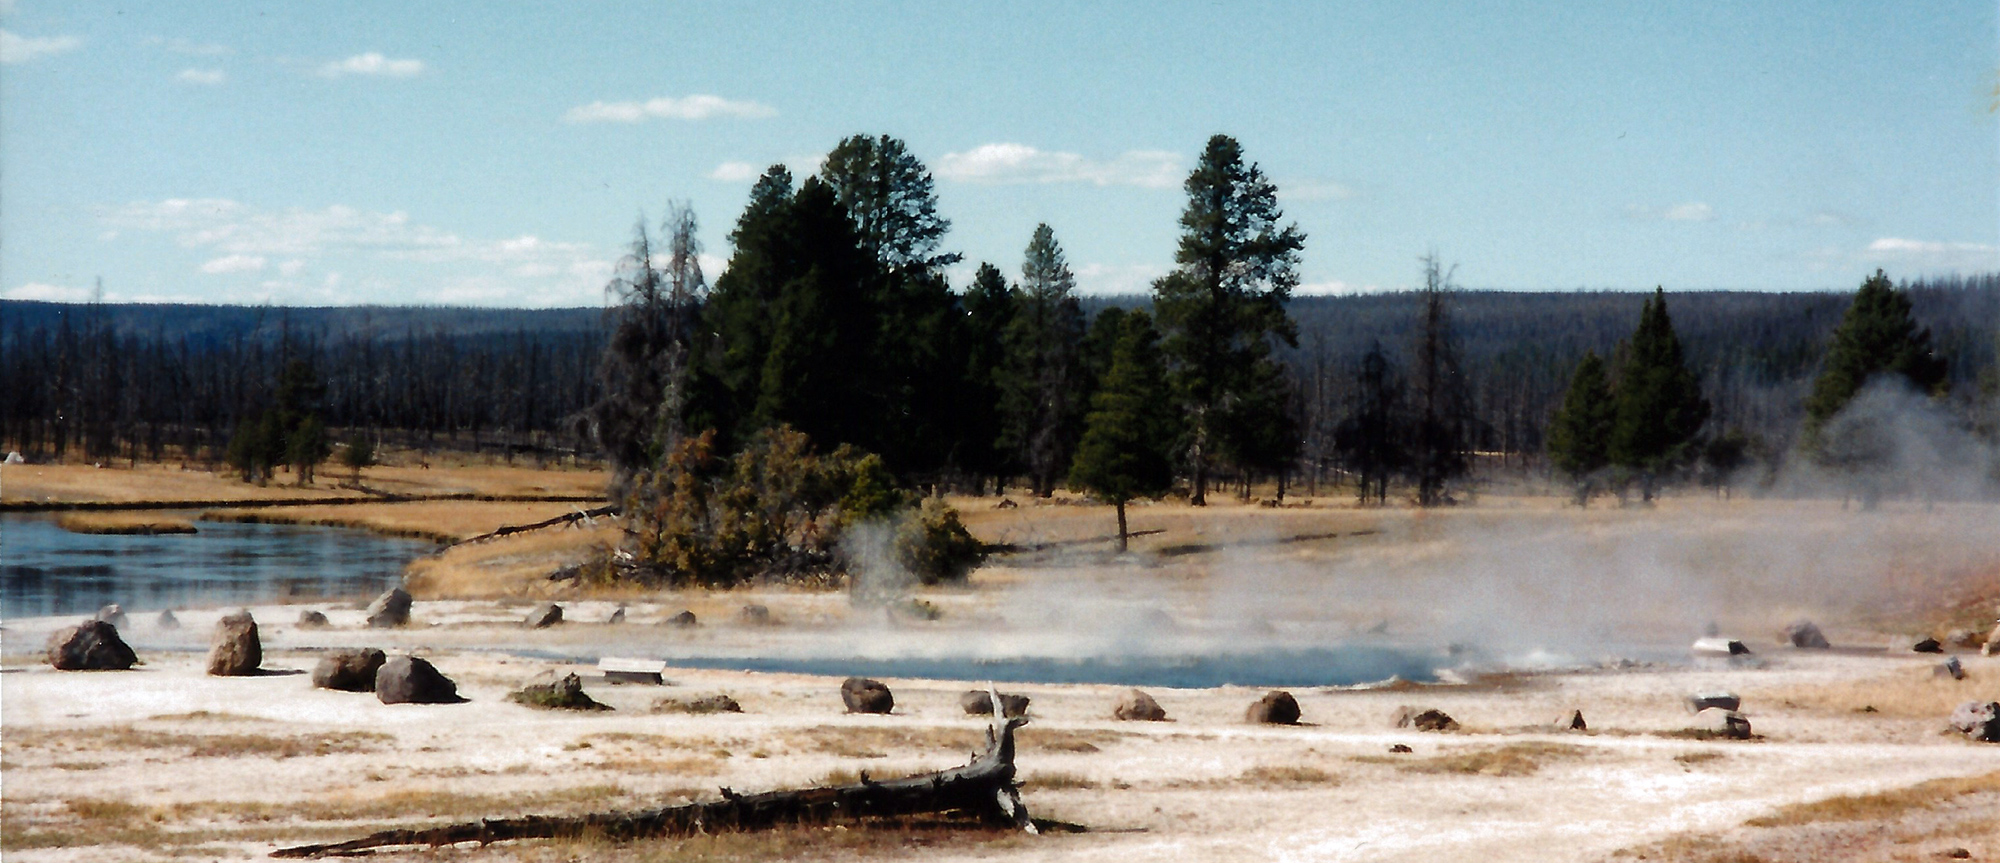 Hot springs at the Firehole river